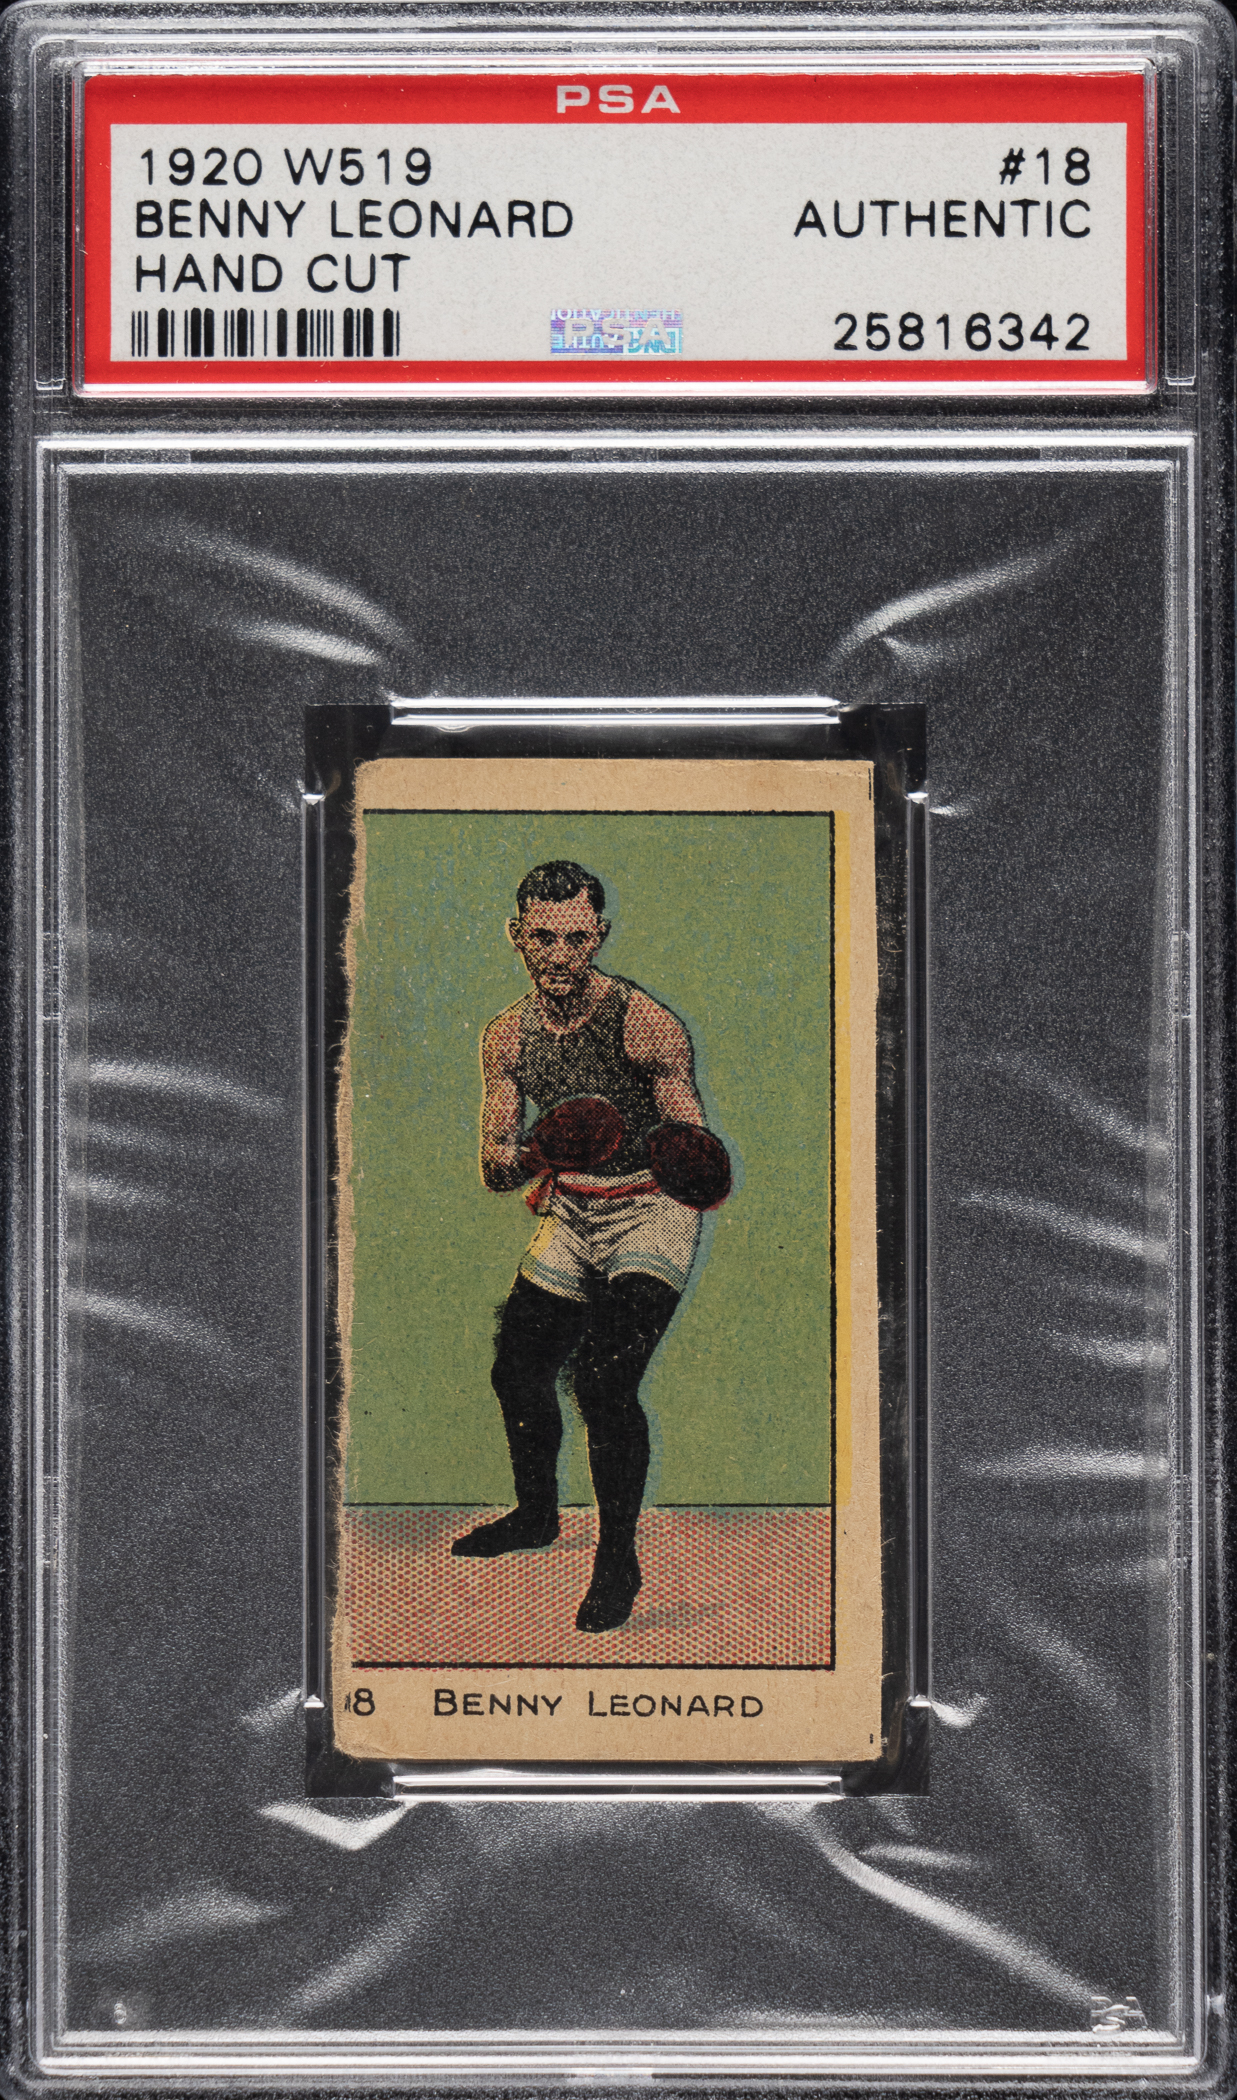 1920 W519 Boxing card of Hall of Famer Benny Leonard graded PSA Authentic